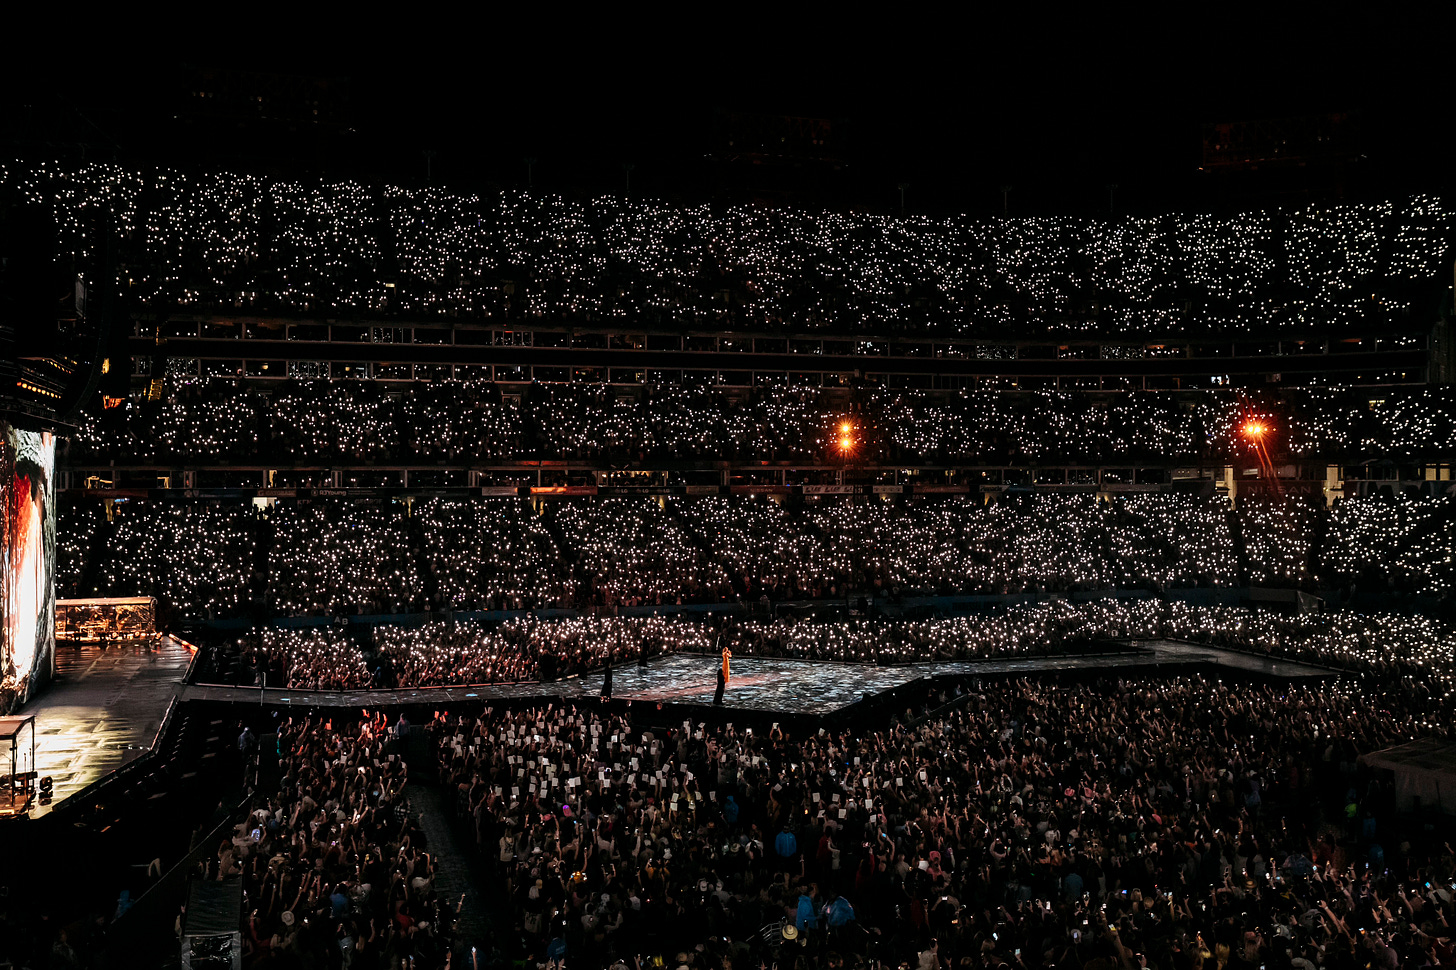 Nissan Stadium on Twitter: "The Swifties showed up and showed out tonight!  🫶 Nissan Stadium broke an all-time concert attendance record with 70,000  fans for Night 1 of Taylor Swift: The Eras